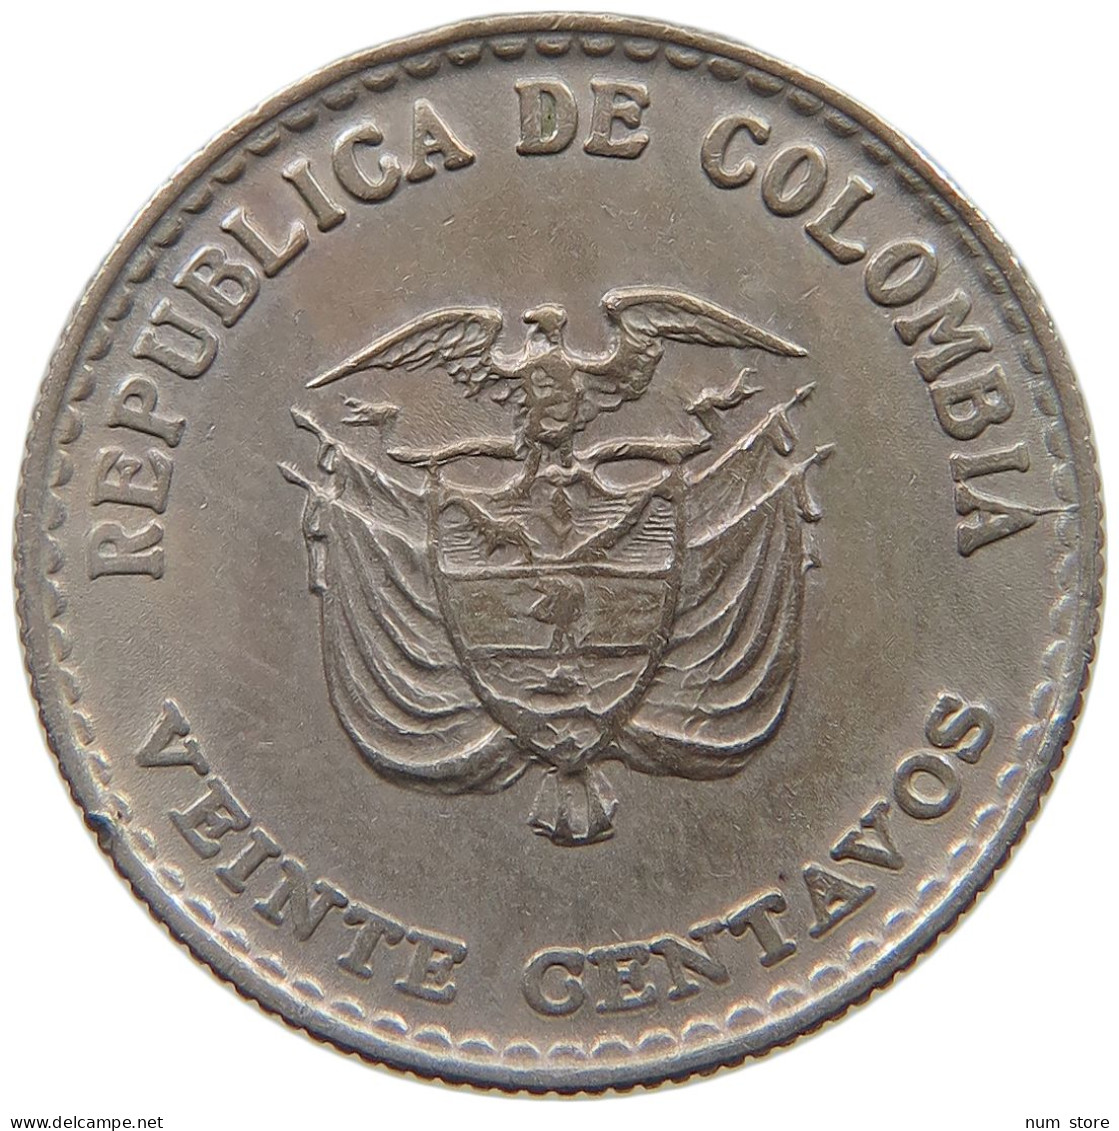 COLOMBIA 20 CENTAVOS 1965 #a080 0151 - Colombie